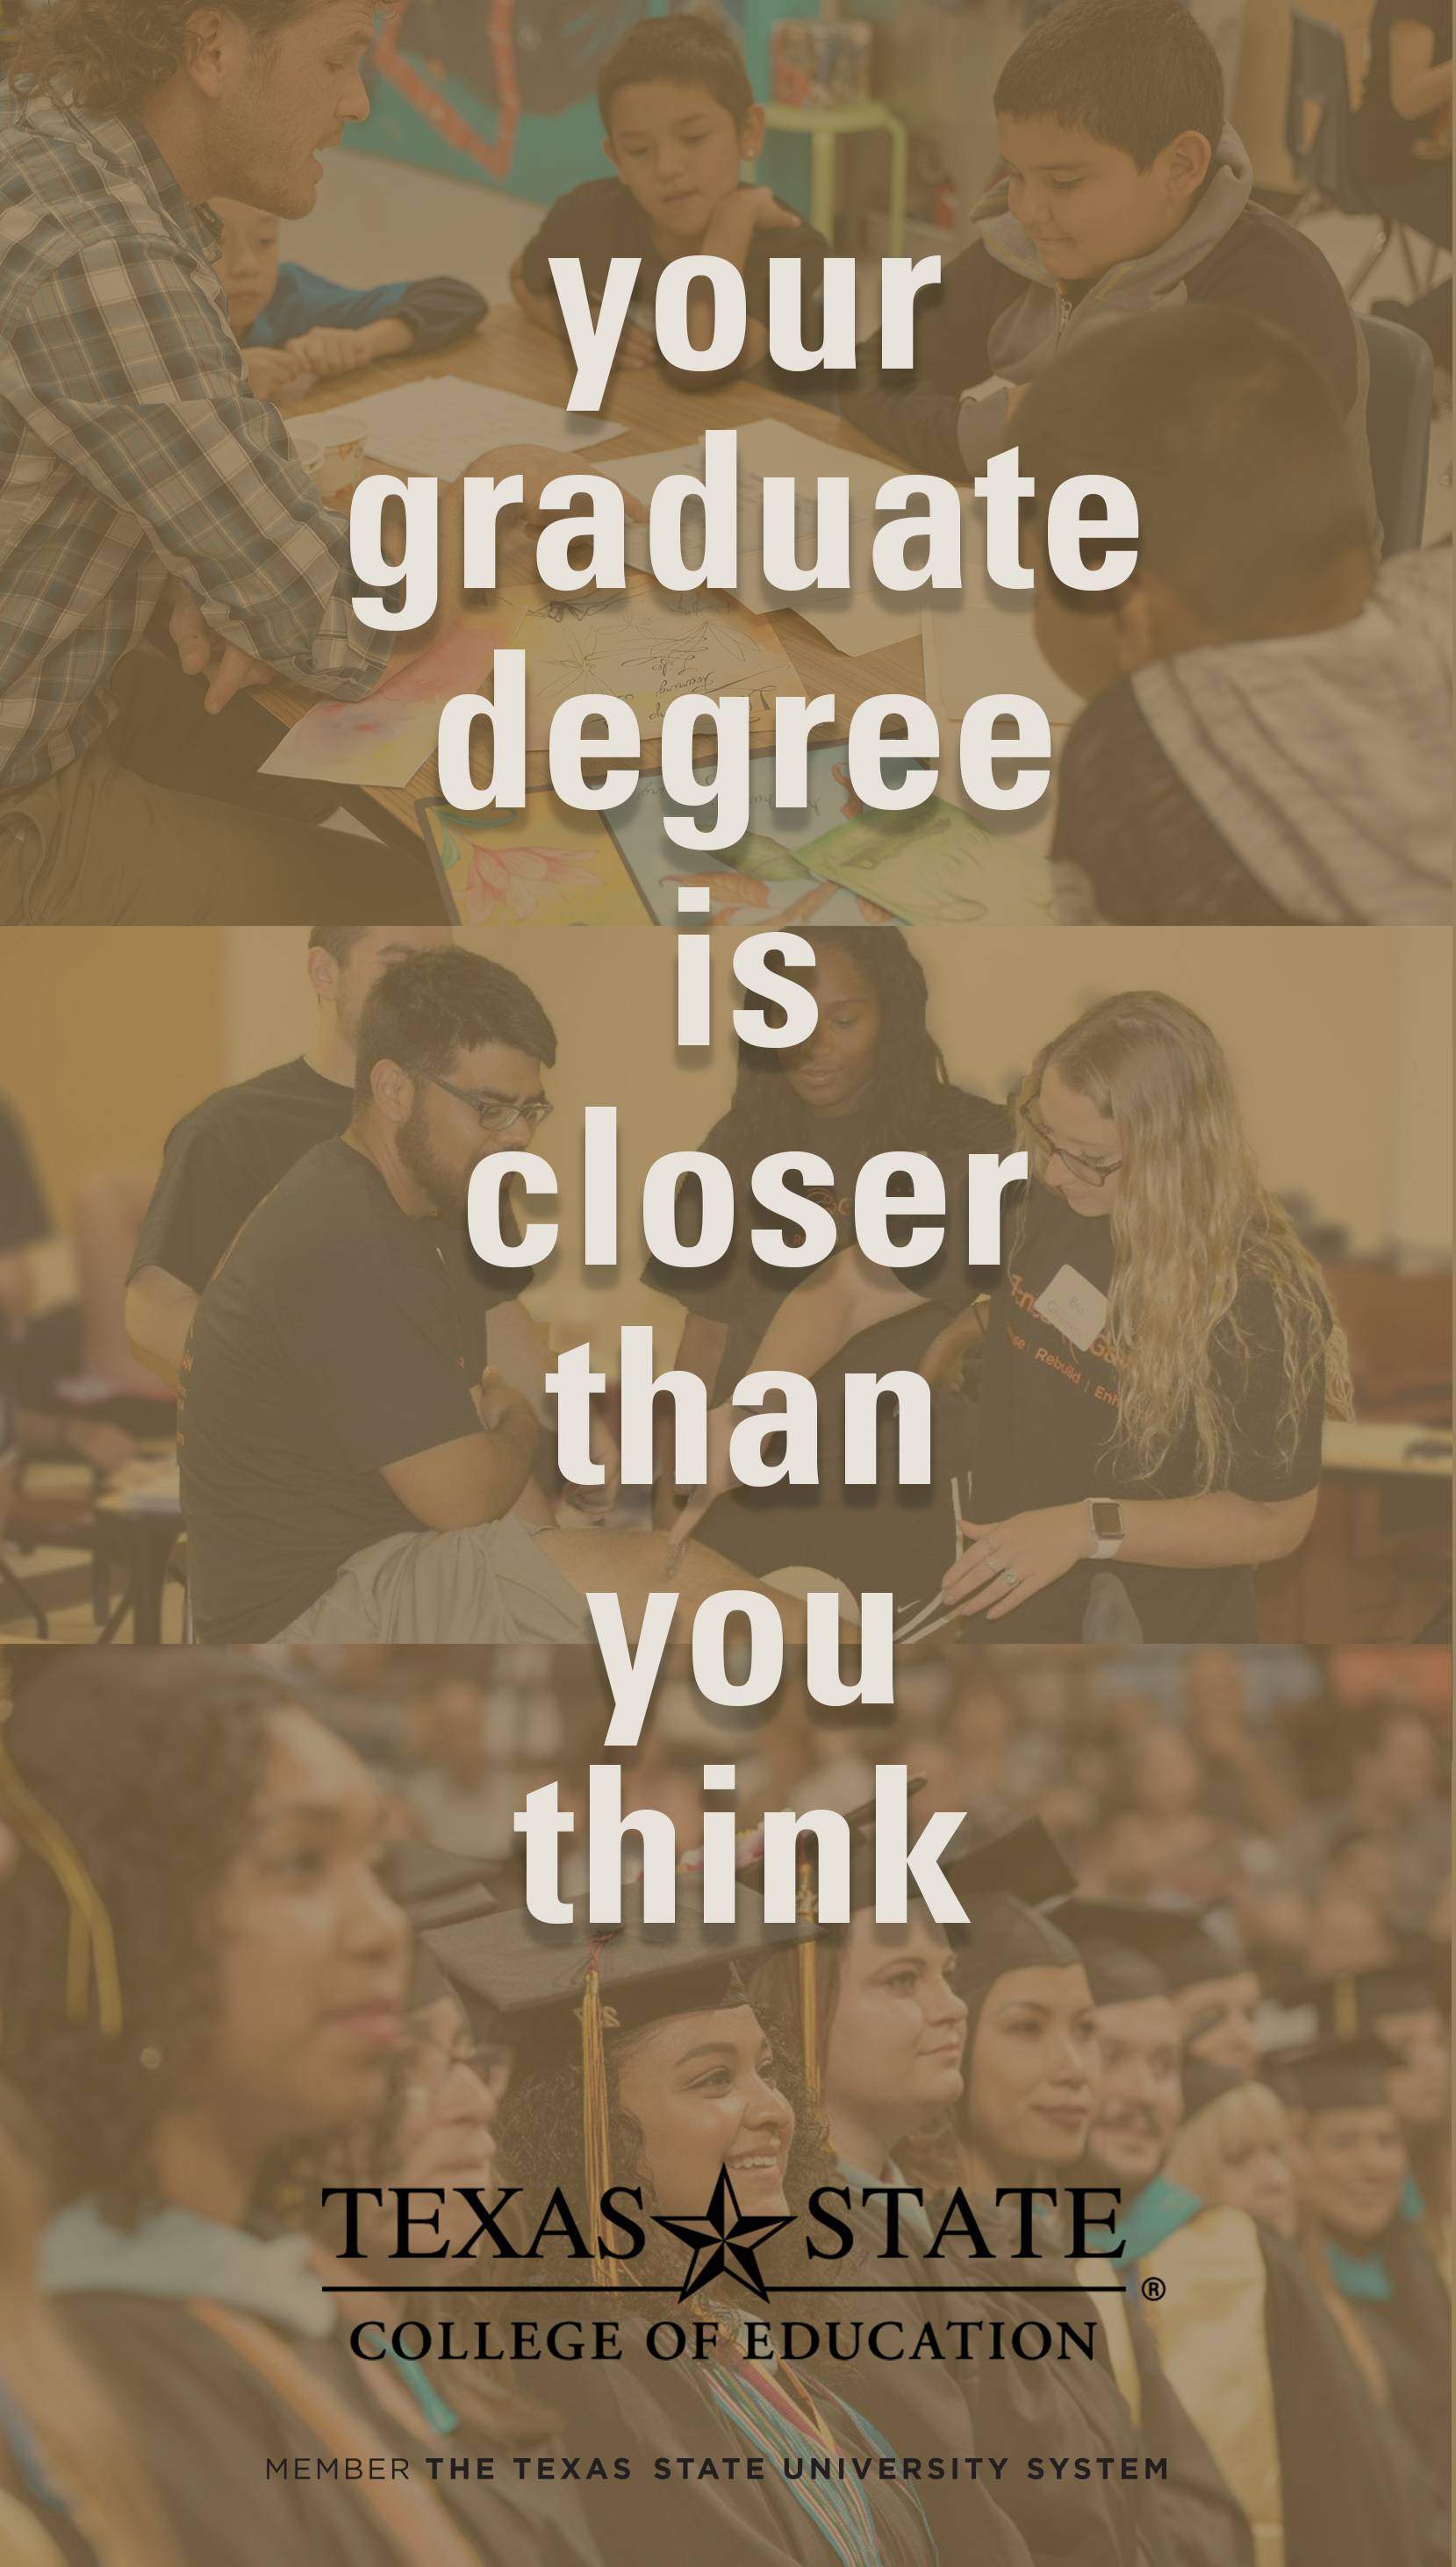 Your graduate degree is closer than you think.